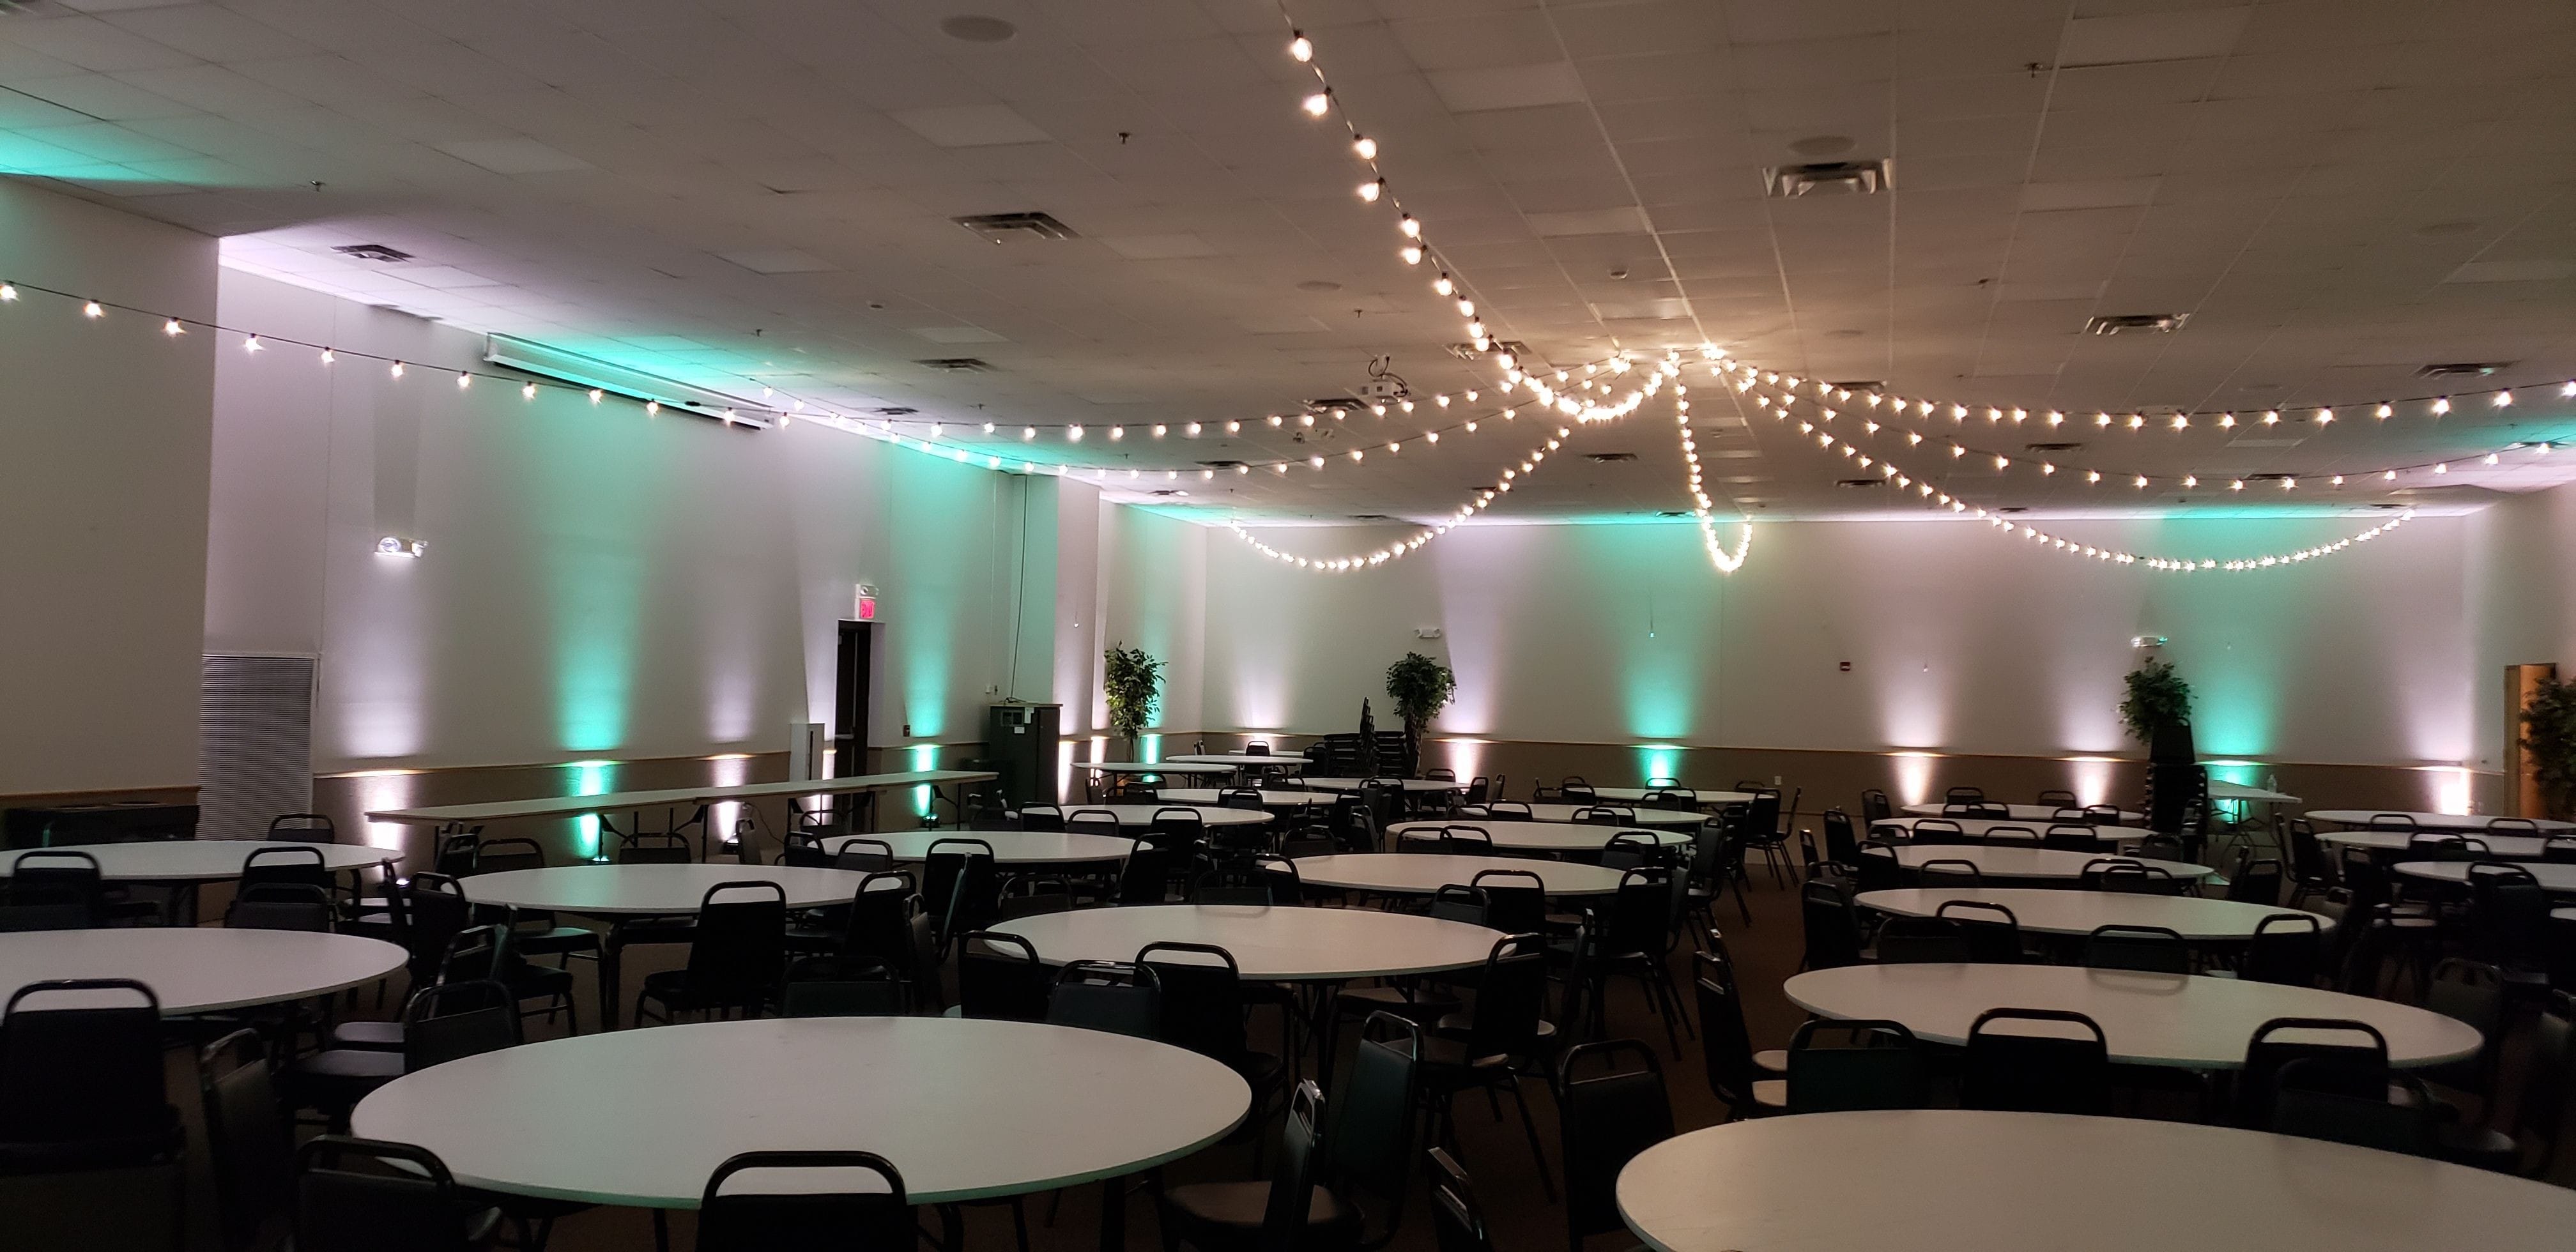 Wedding lighting at the AAD Shrine by Duluth Event lighting up lighting in mint green and soft white with a starburst design of bistro